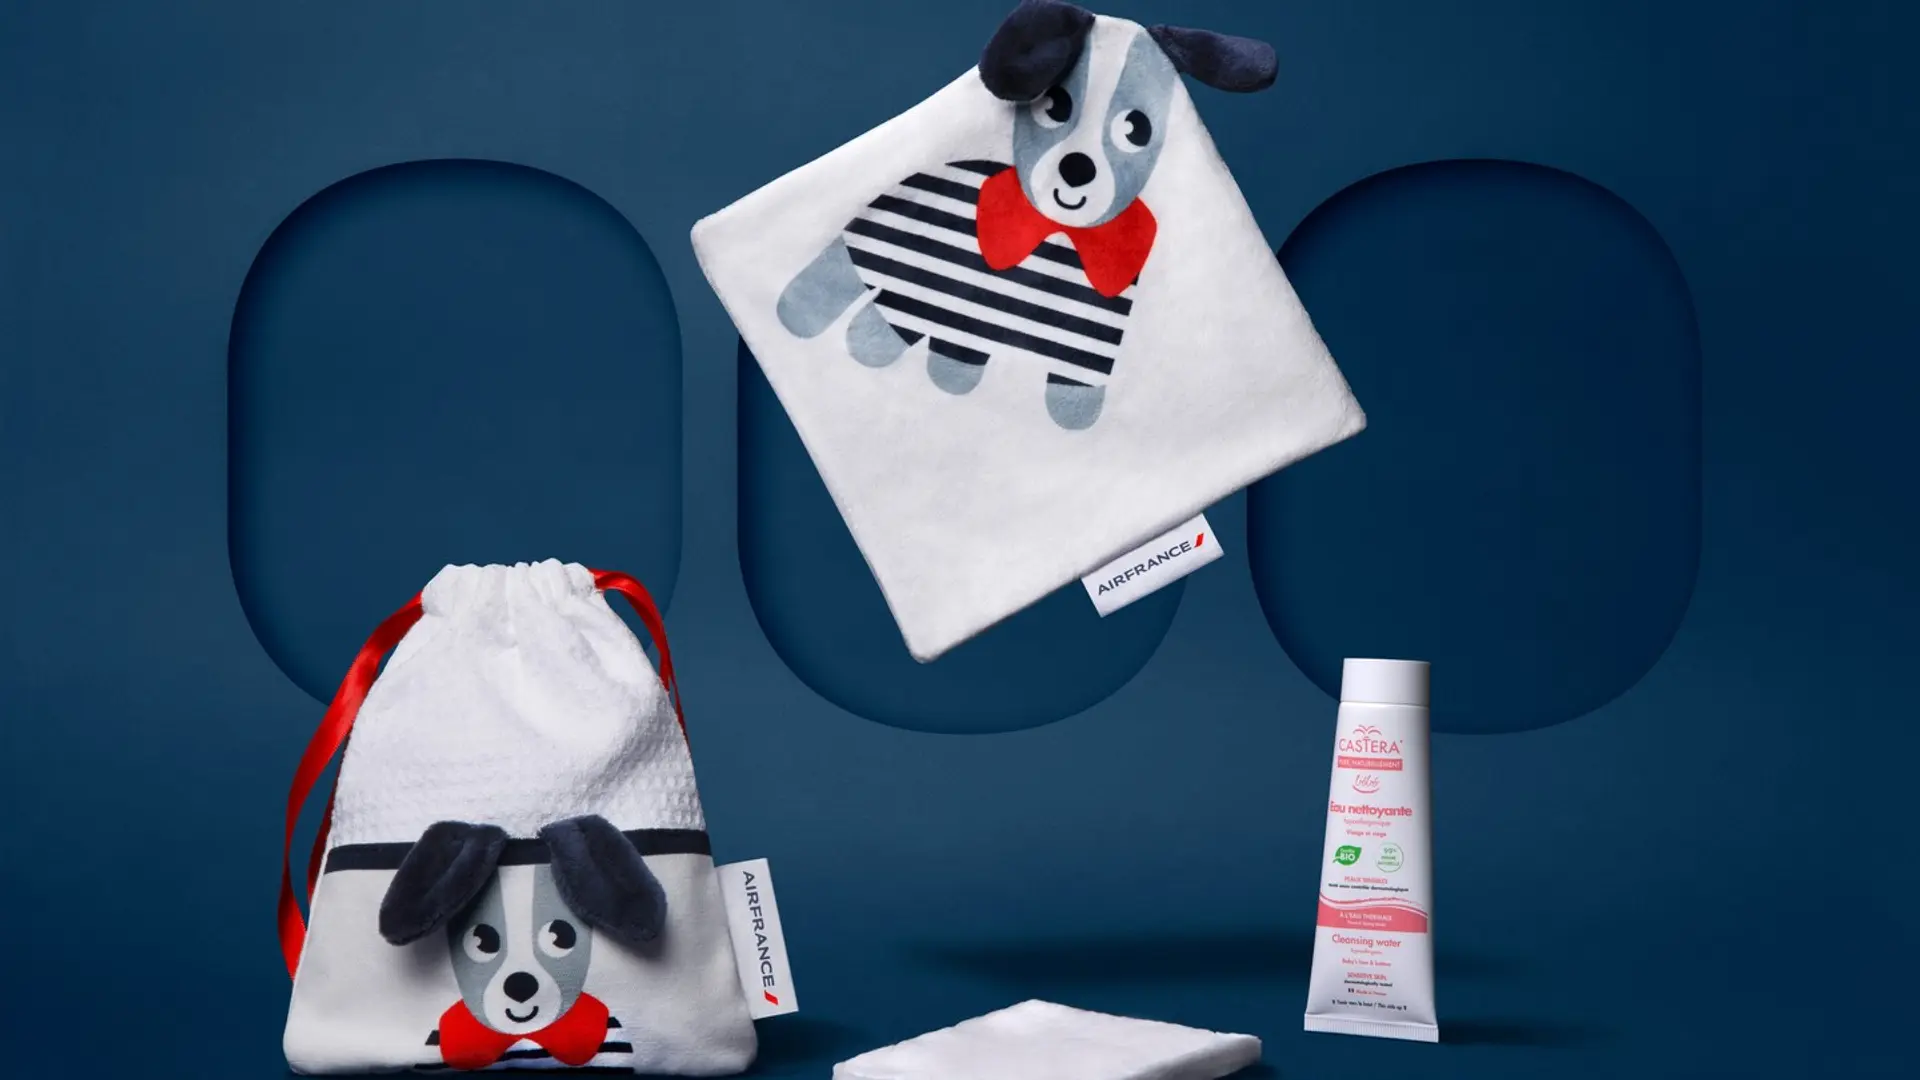 Airlines News - Air France unveils new products for kids